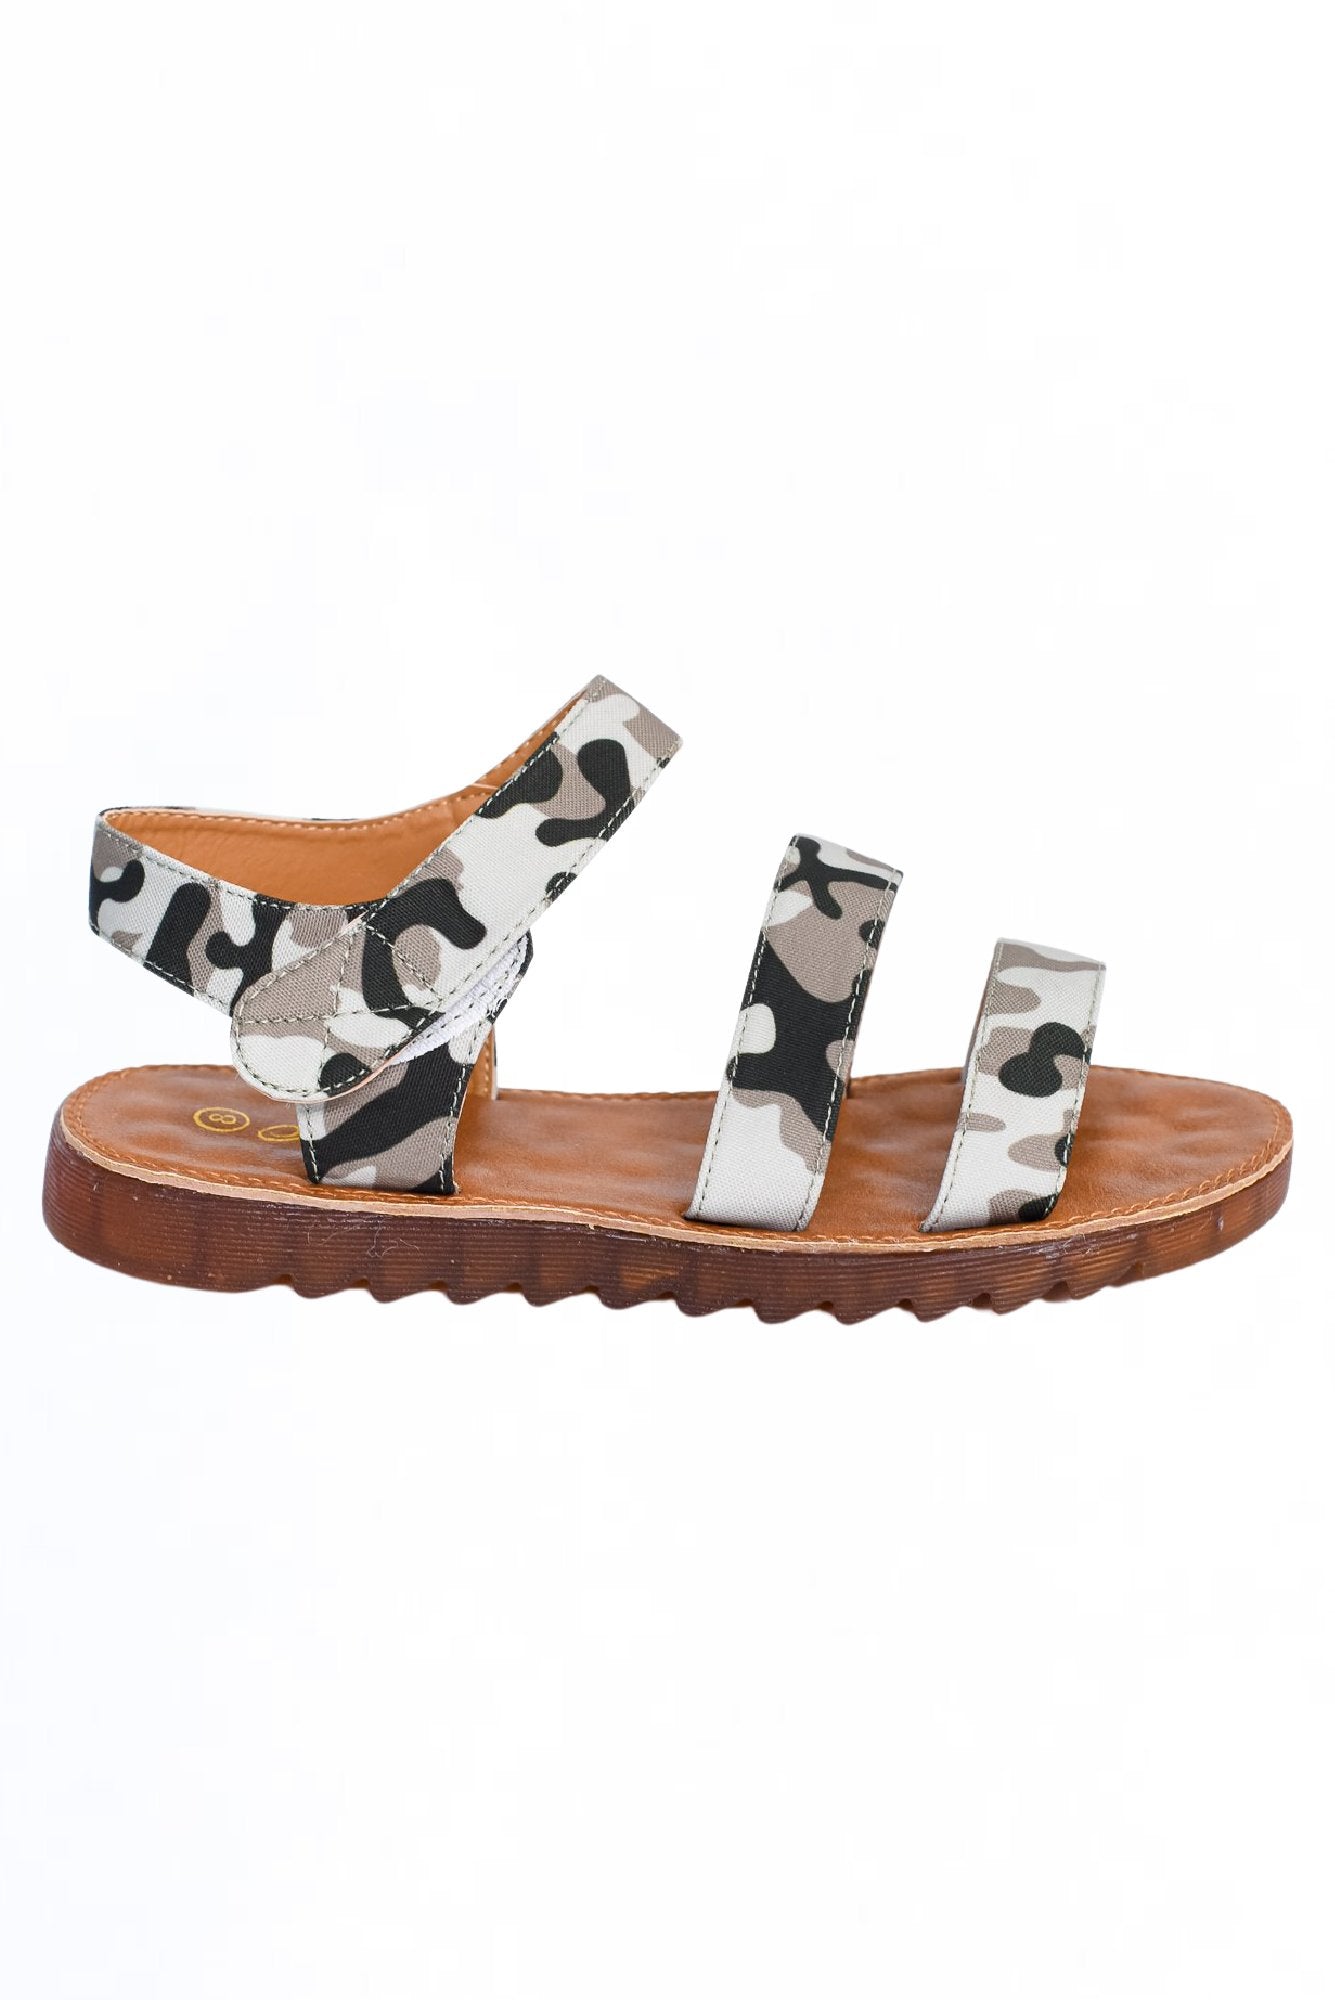 Summer Is Calling Camouflage Sandals - SHO2038OL